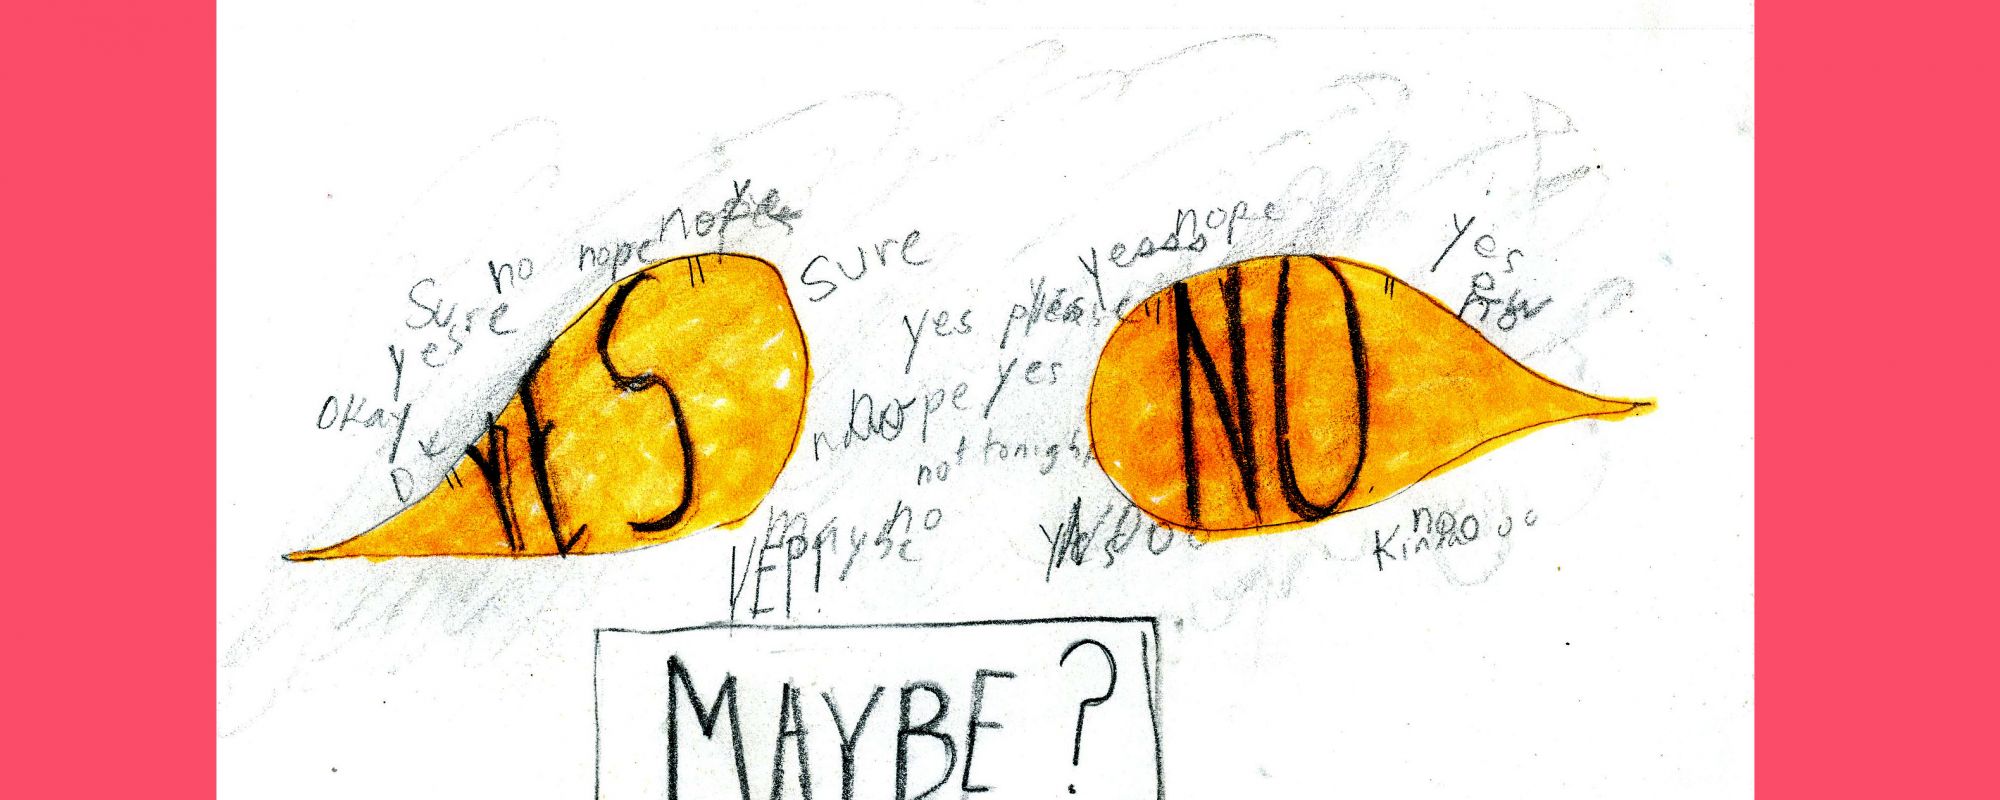 An art piece with the words "yes" "no" and "maybe" clear among other variations of those words.